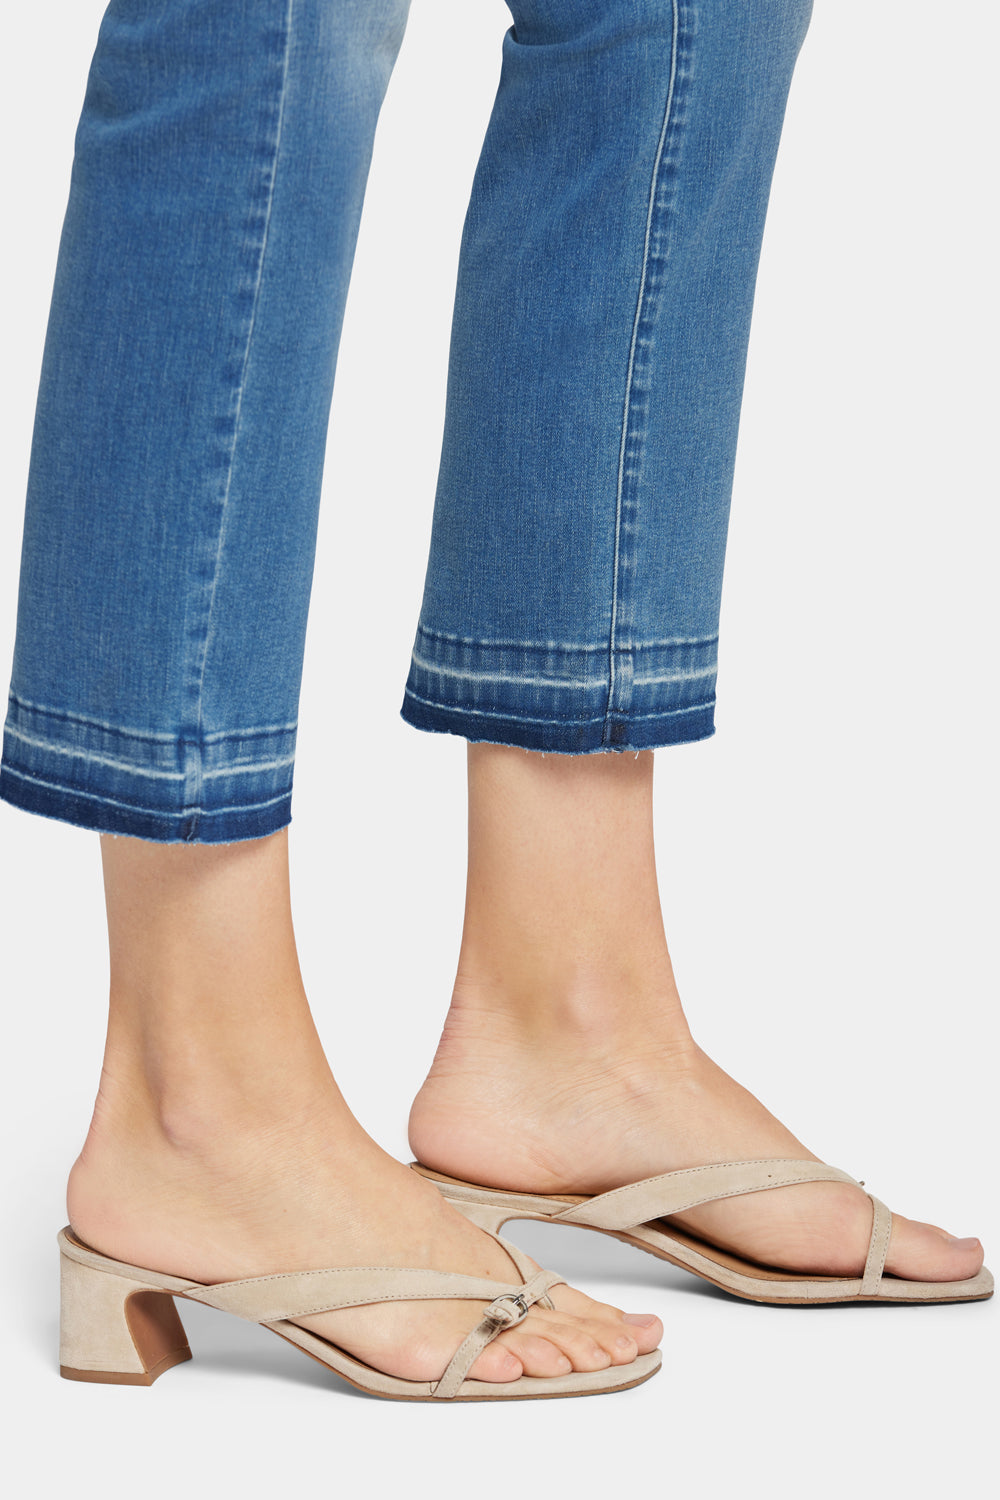 NYDJ Marilyn Straight Ankle Jeans In Petite In Cool Embrace® Denim With High Rise And Released Hems - Stunning